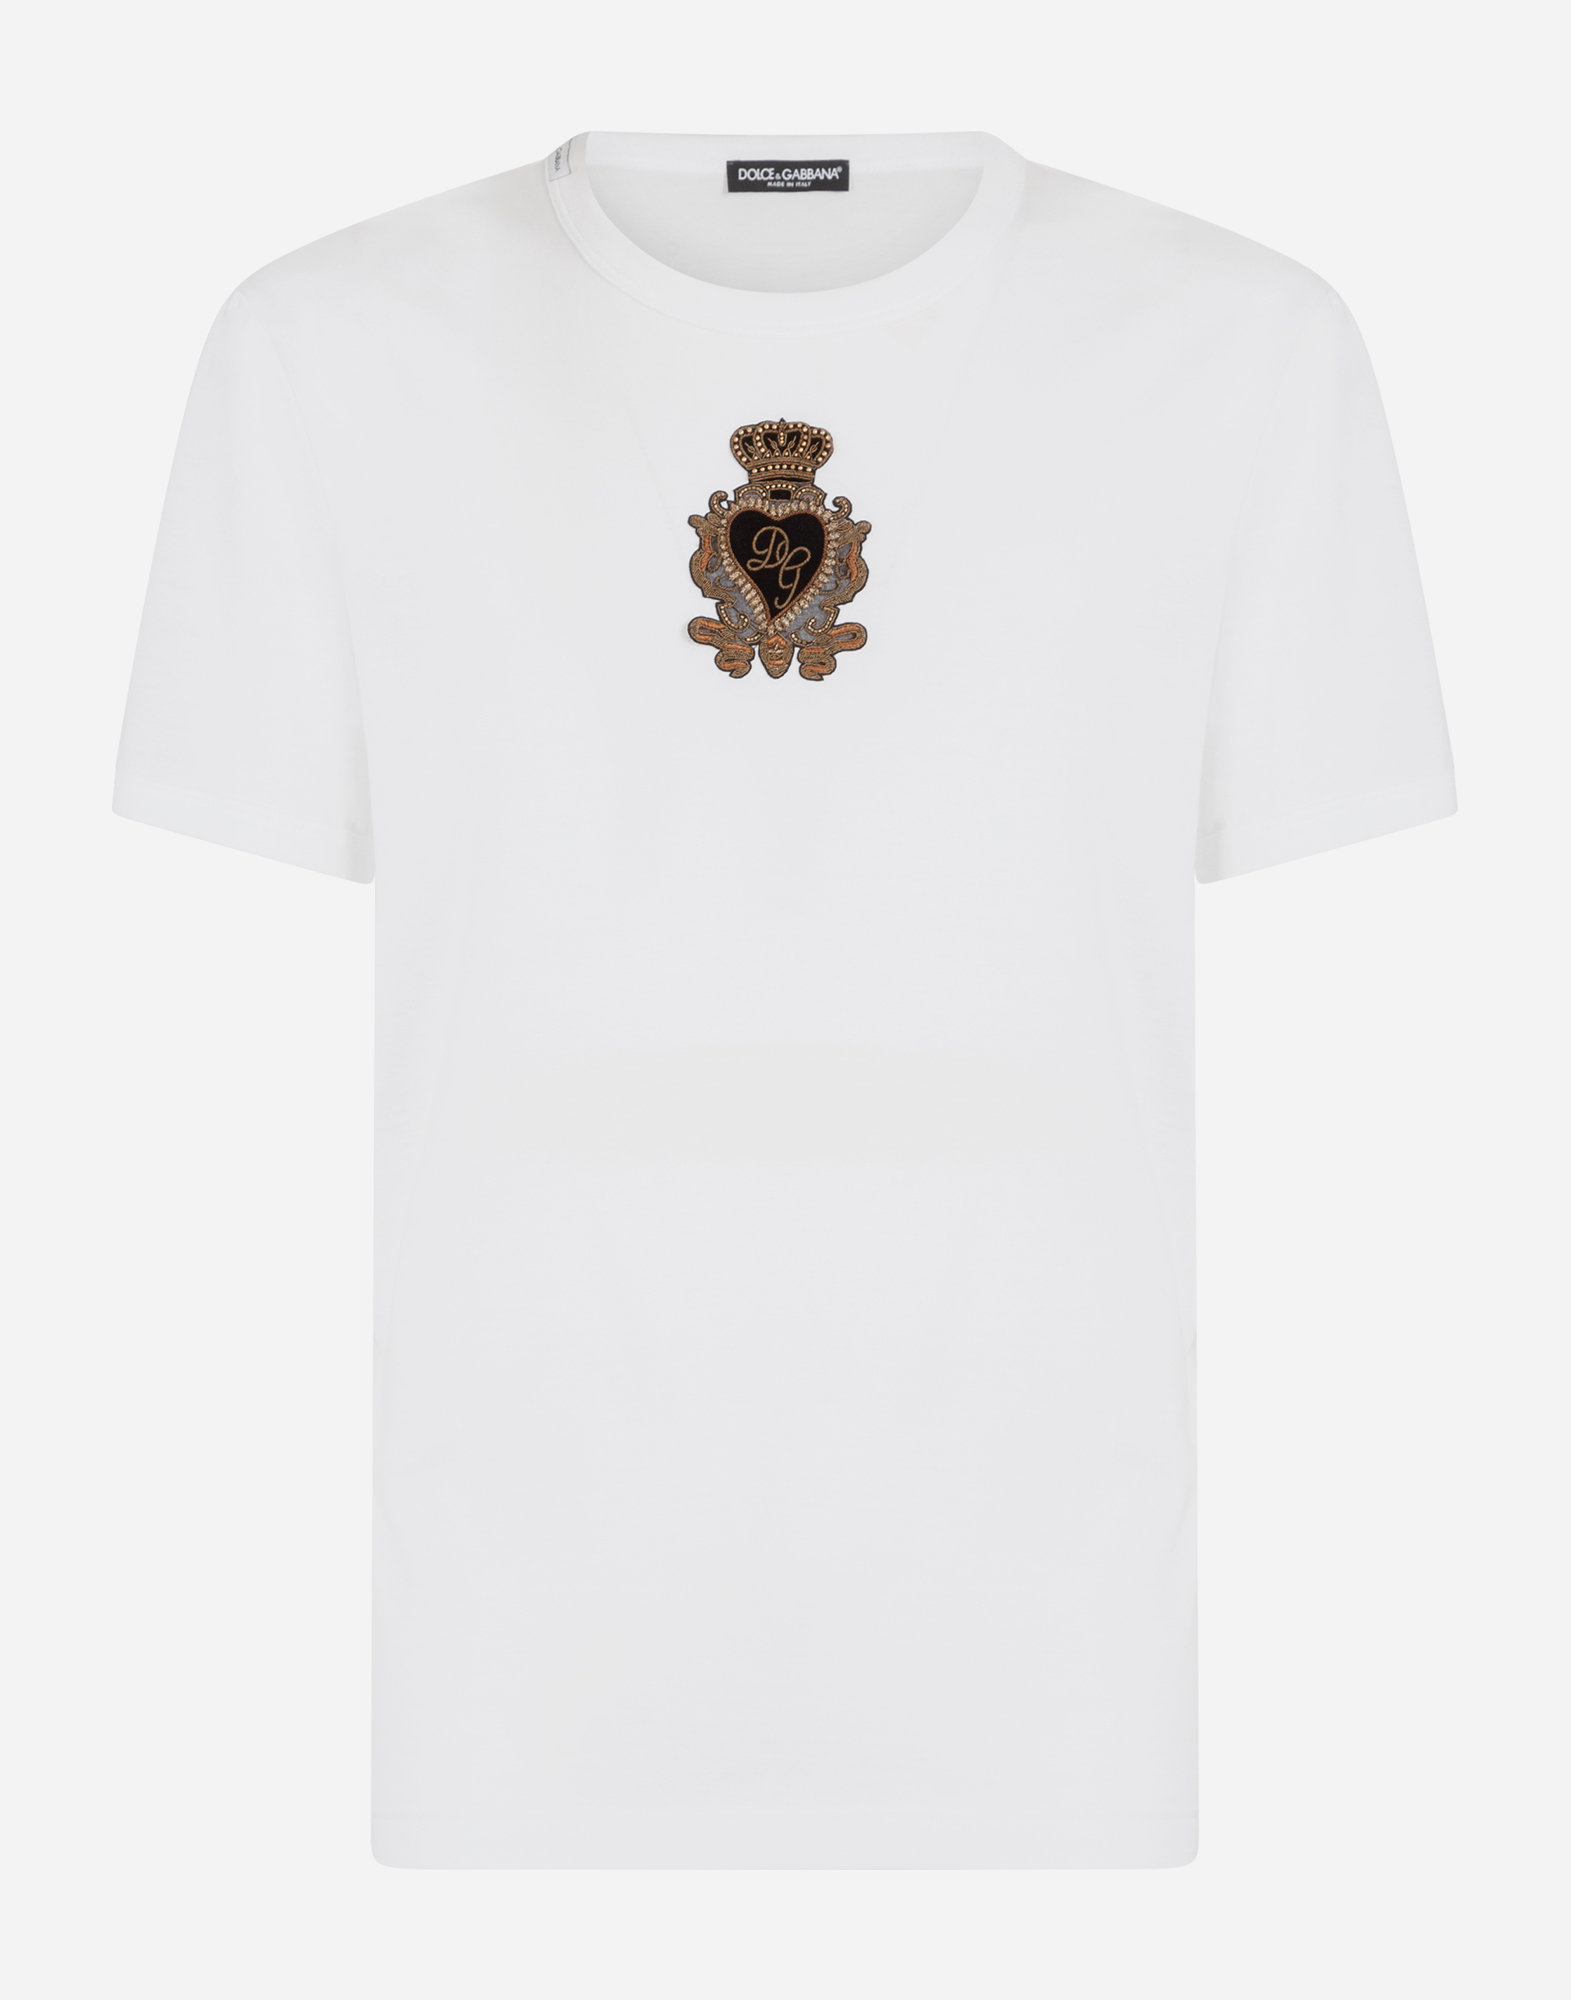 Cotton t-shirt with heraldic patch